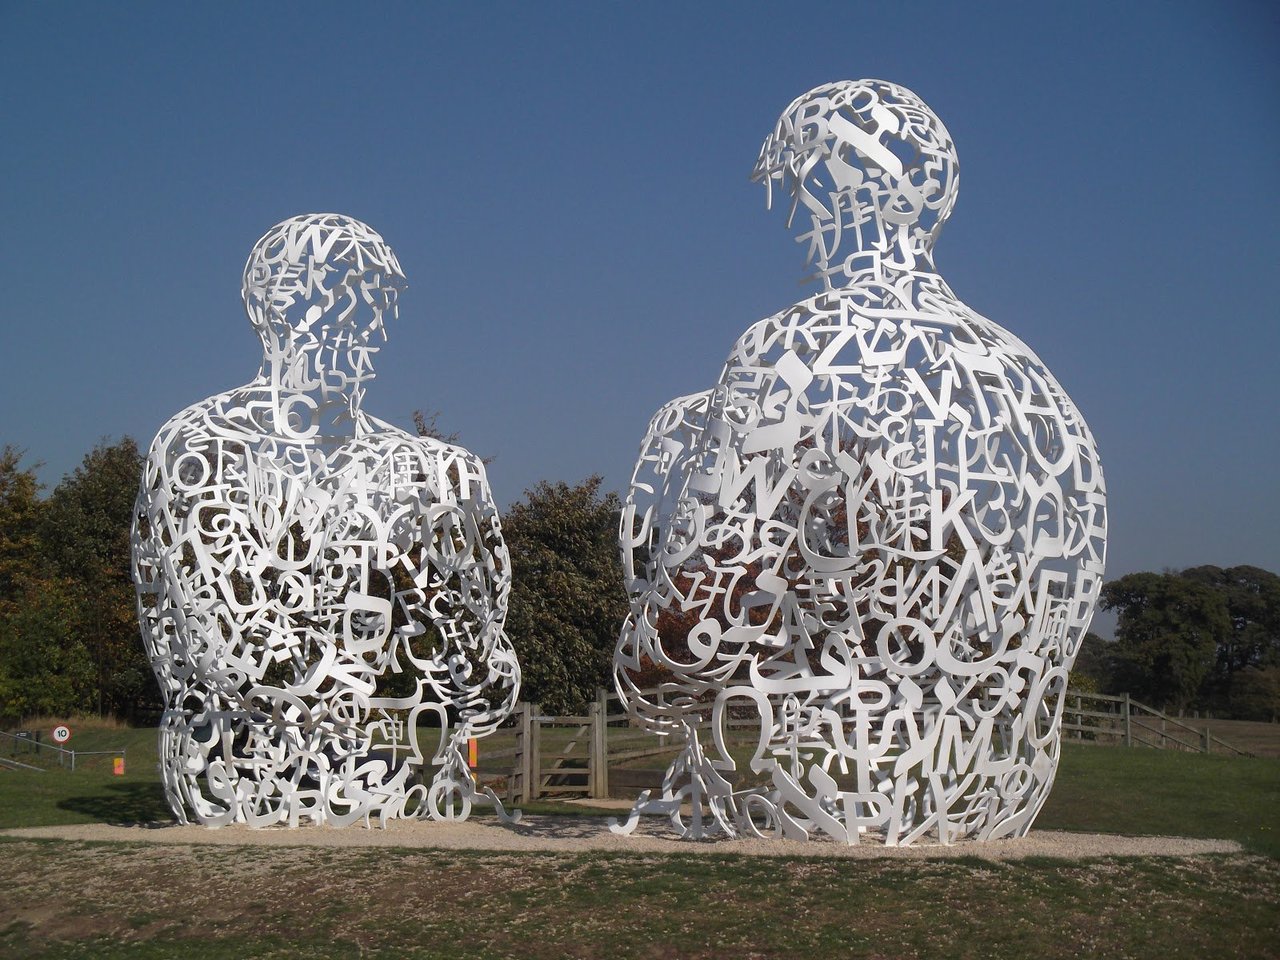 Today's #FontSunday theme is #PublicArt fonts. Post yours from 12 noon. Here's one by Jaume Plensa in @YSPsculpture https://t.co/P26xrhgA7N